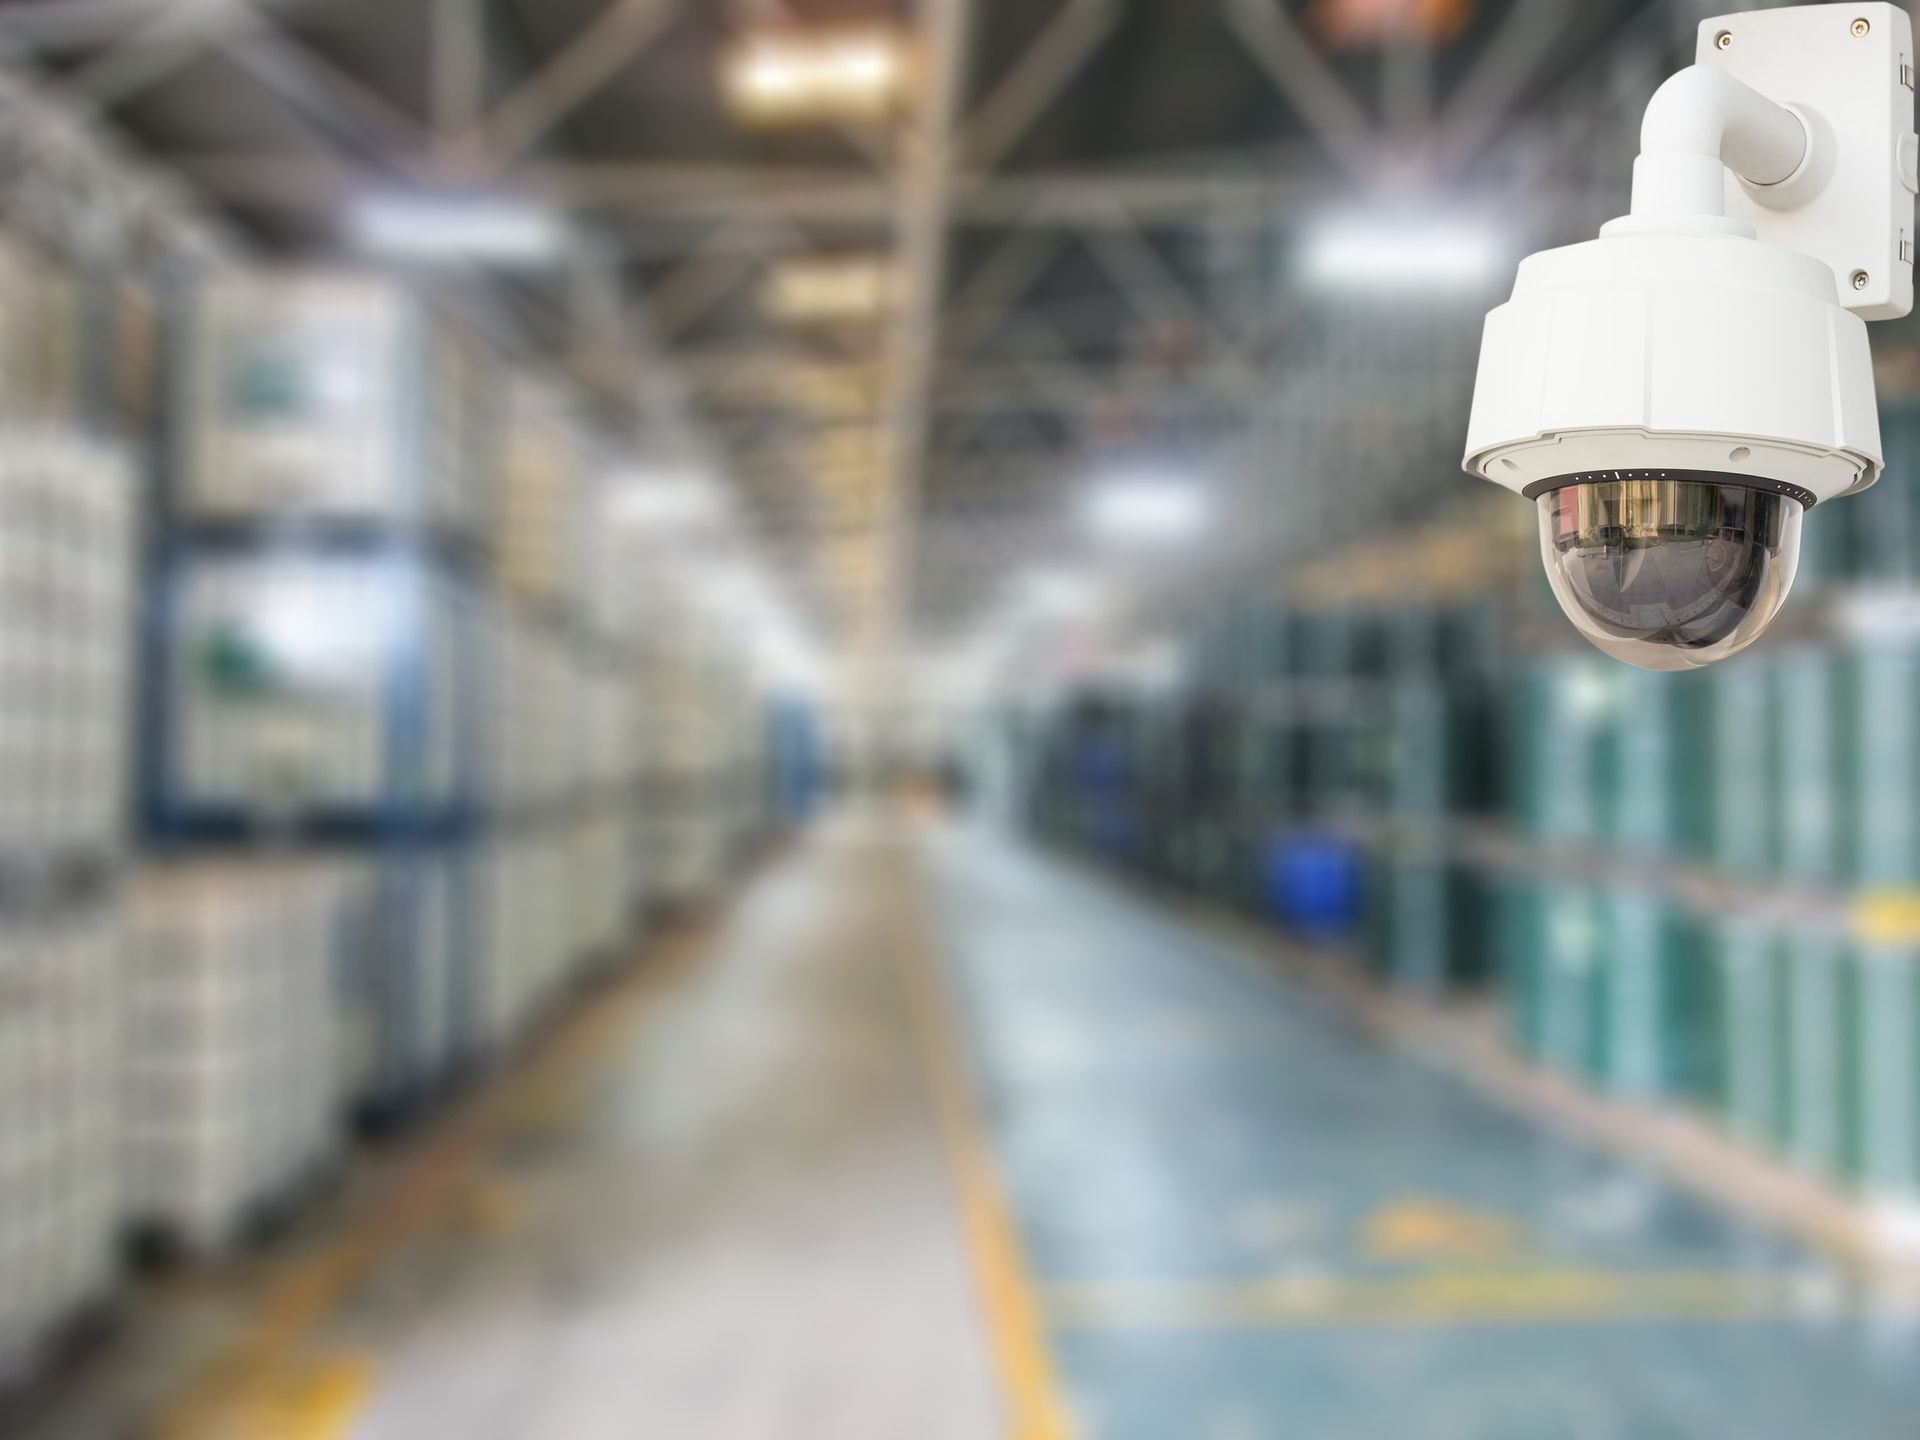 Warehouse security systems